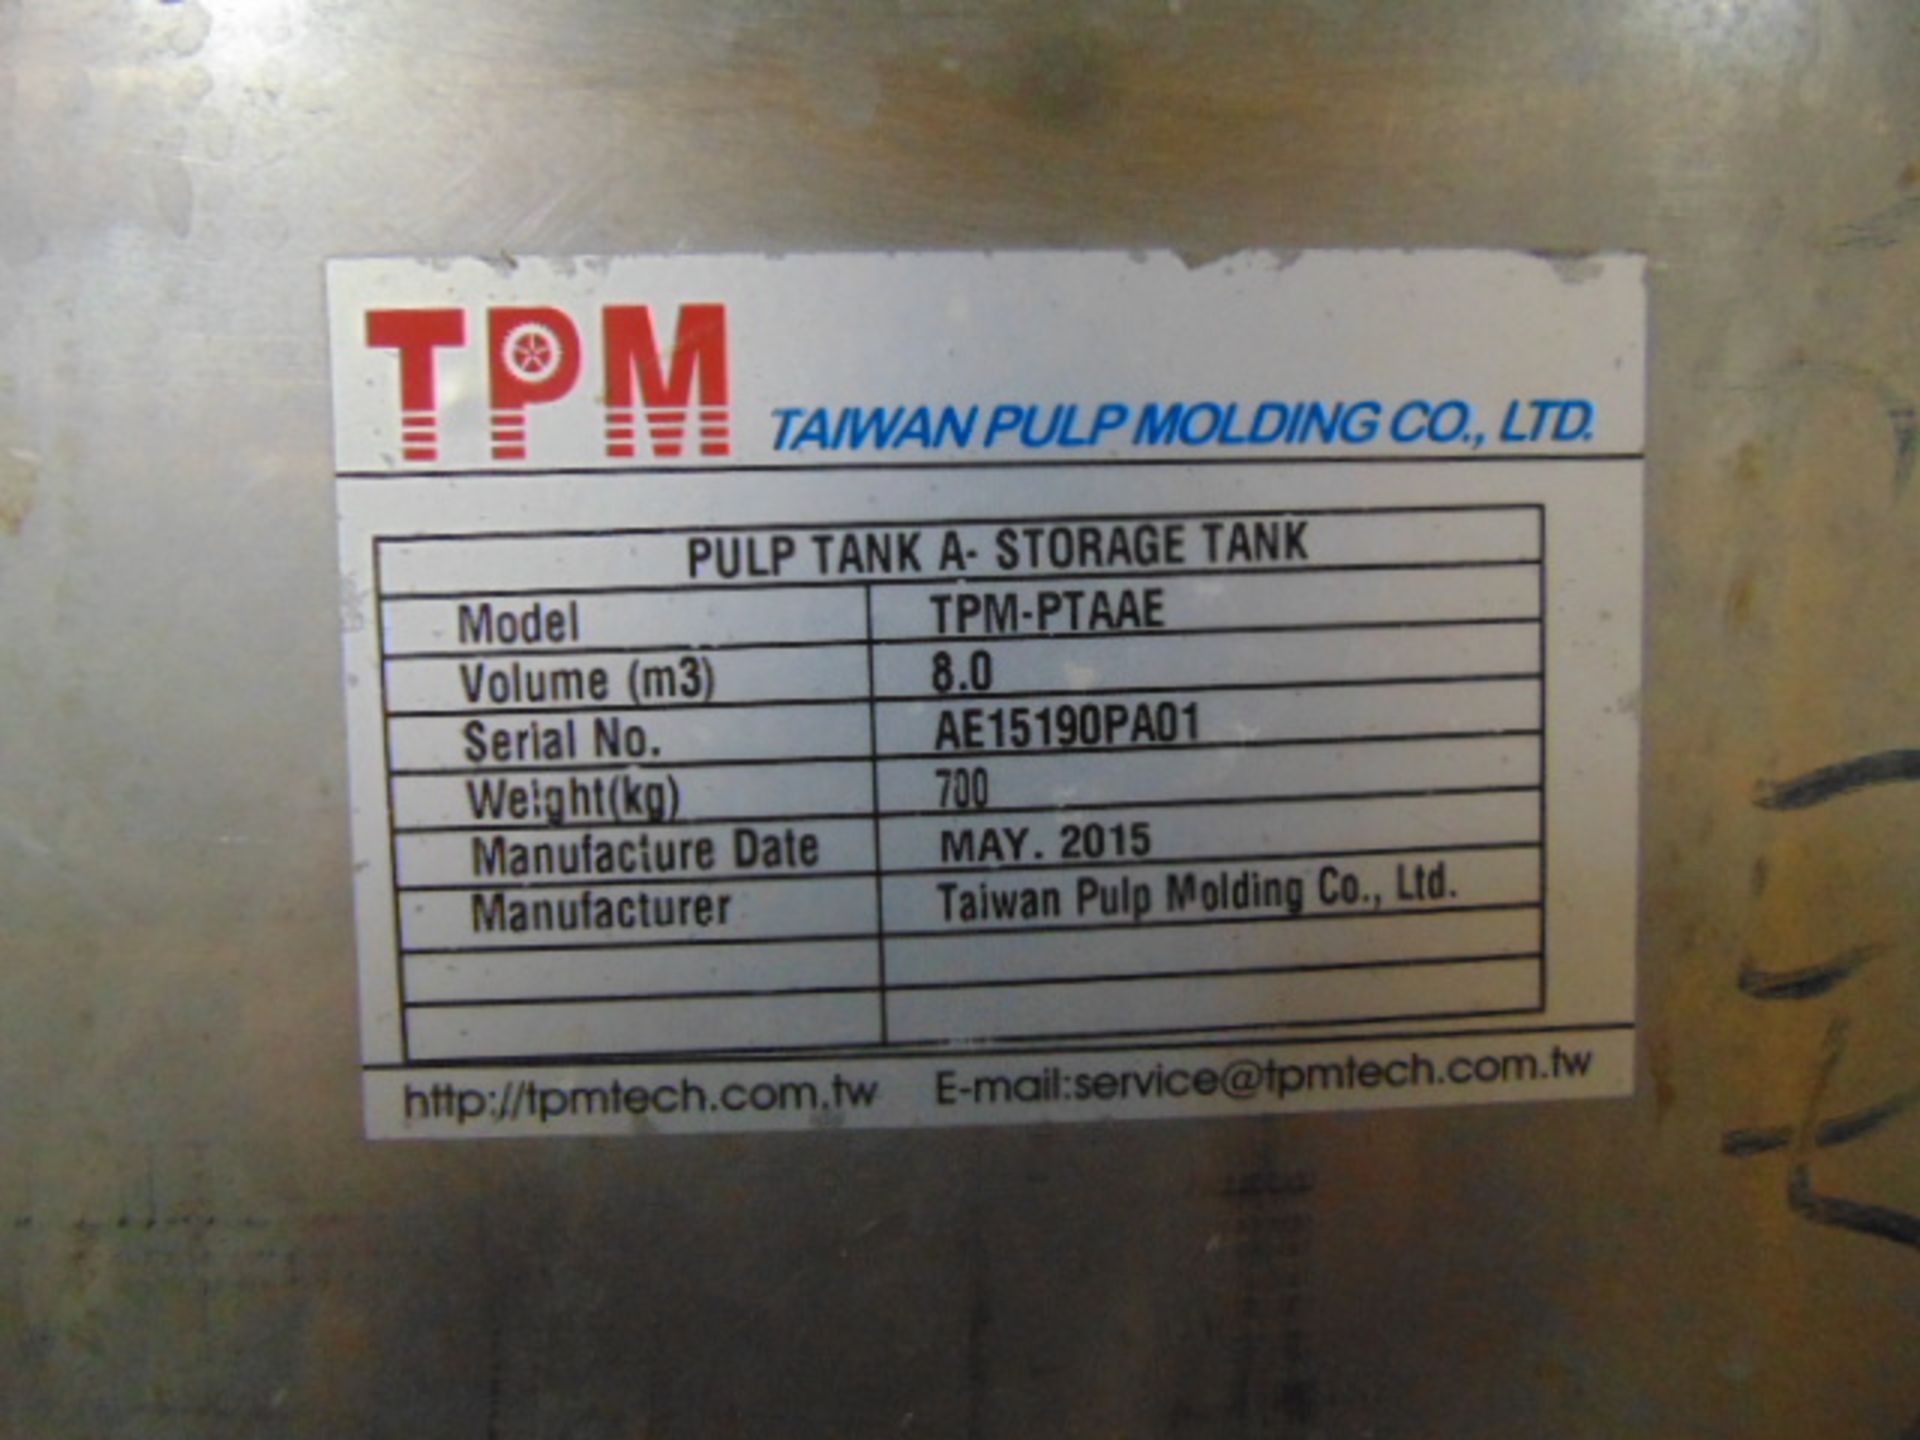 STAINLESS STEEL CONE BOTTOM AGITATED TANK, TAIWAN PULP MACHINERY MDL. TPM-HLPWTAE, 600 gal. cap., - Image 5 of 5